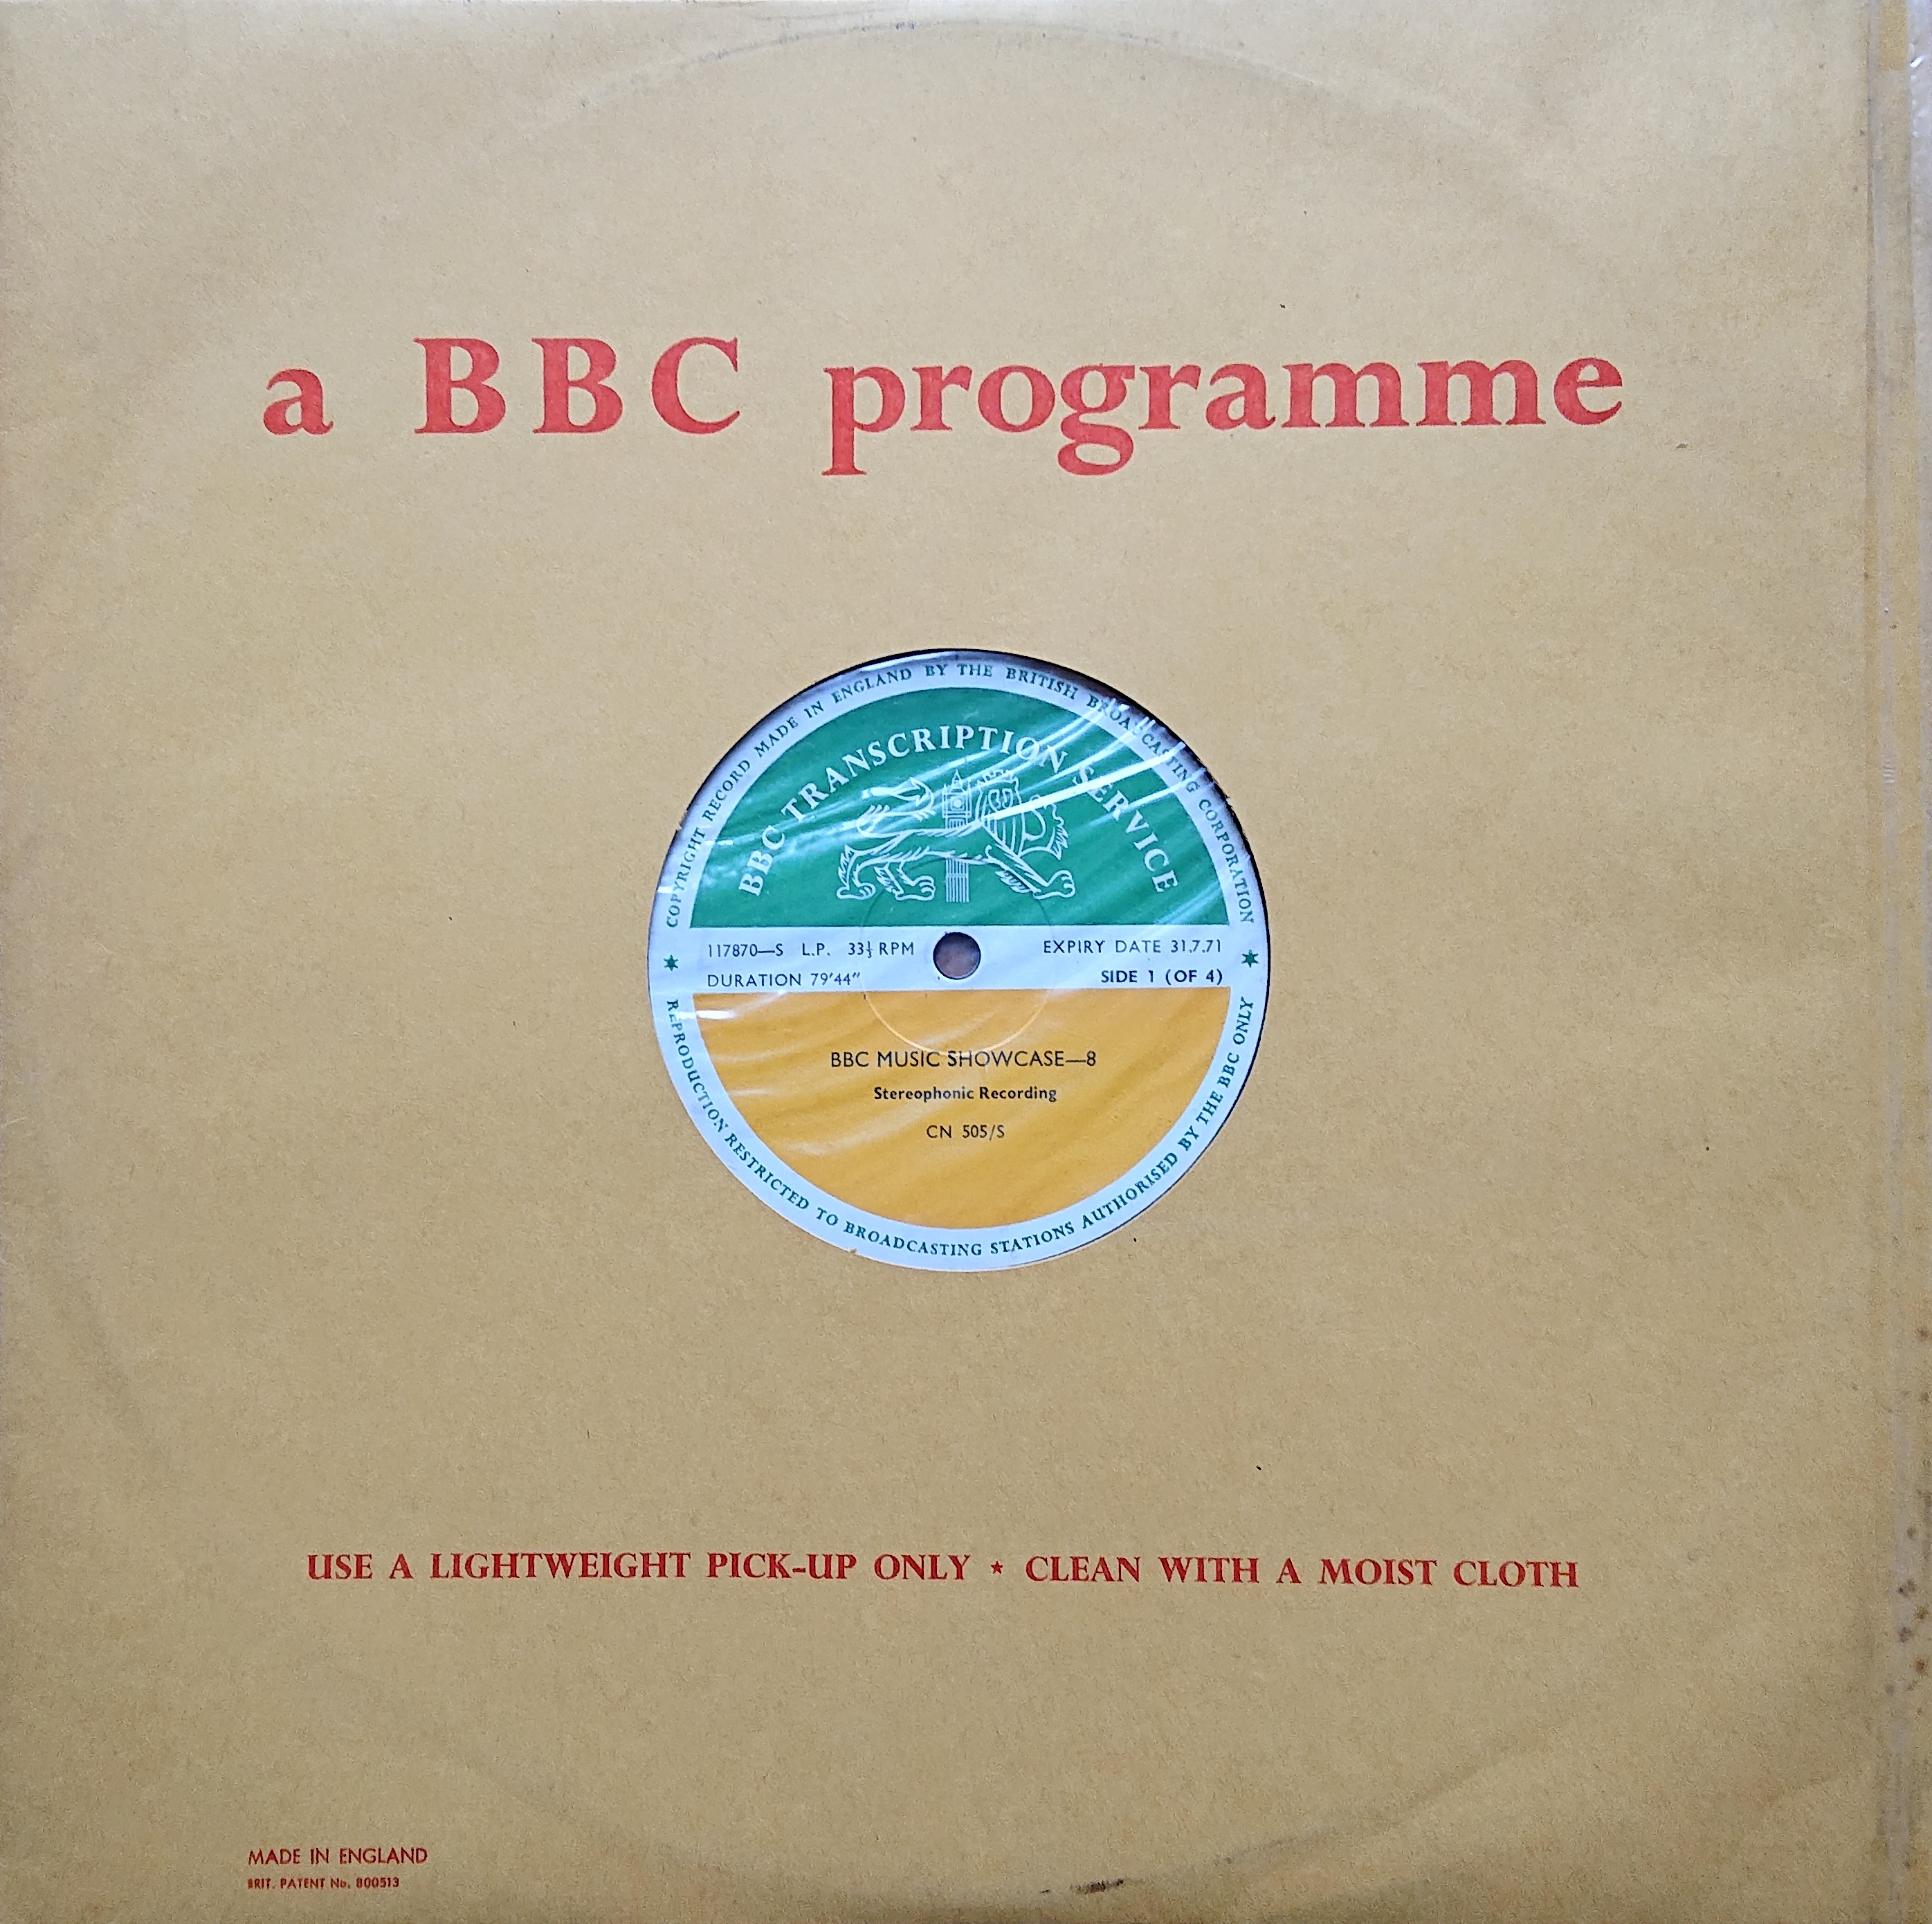 Picture of CN 505 S 15 BBC music showcase - 8 (Sides 1 & 3) by artist Various from the BBC albums - Records and Tapes library